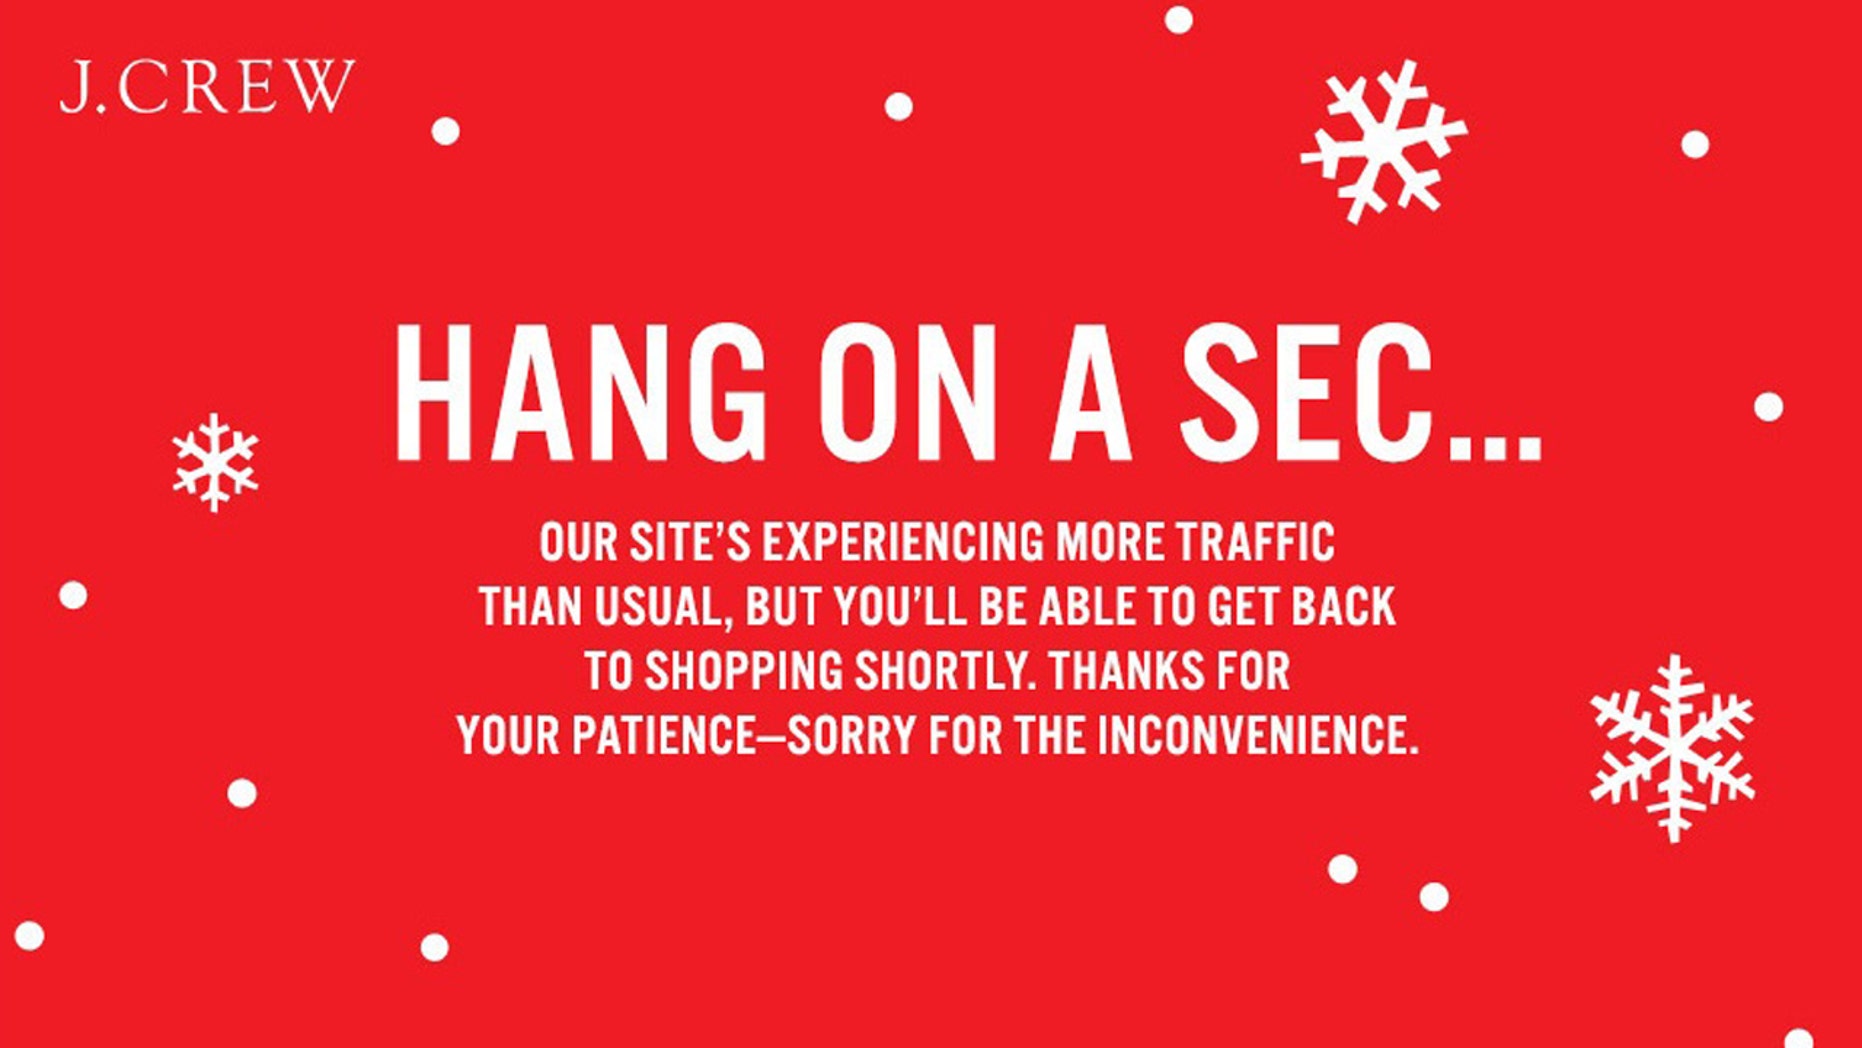 This error message was seen on J.Crew's website Friday as shoppers flocked online to save with Black Friday deals.